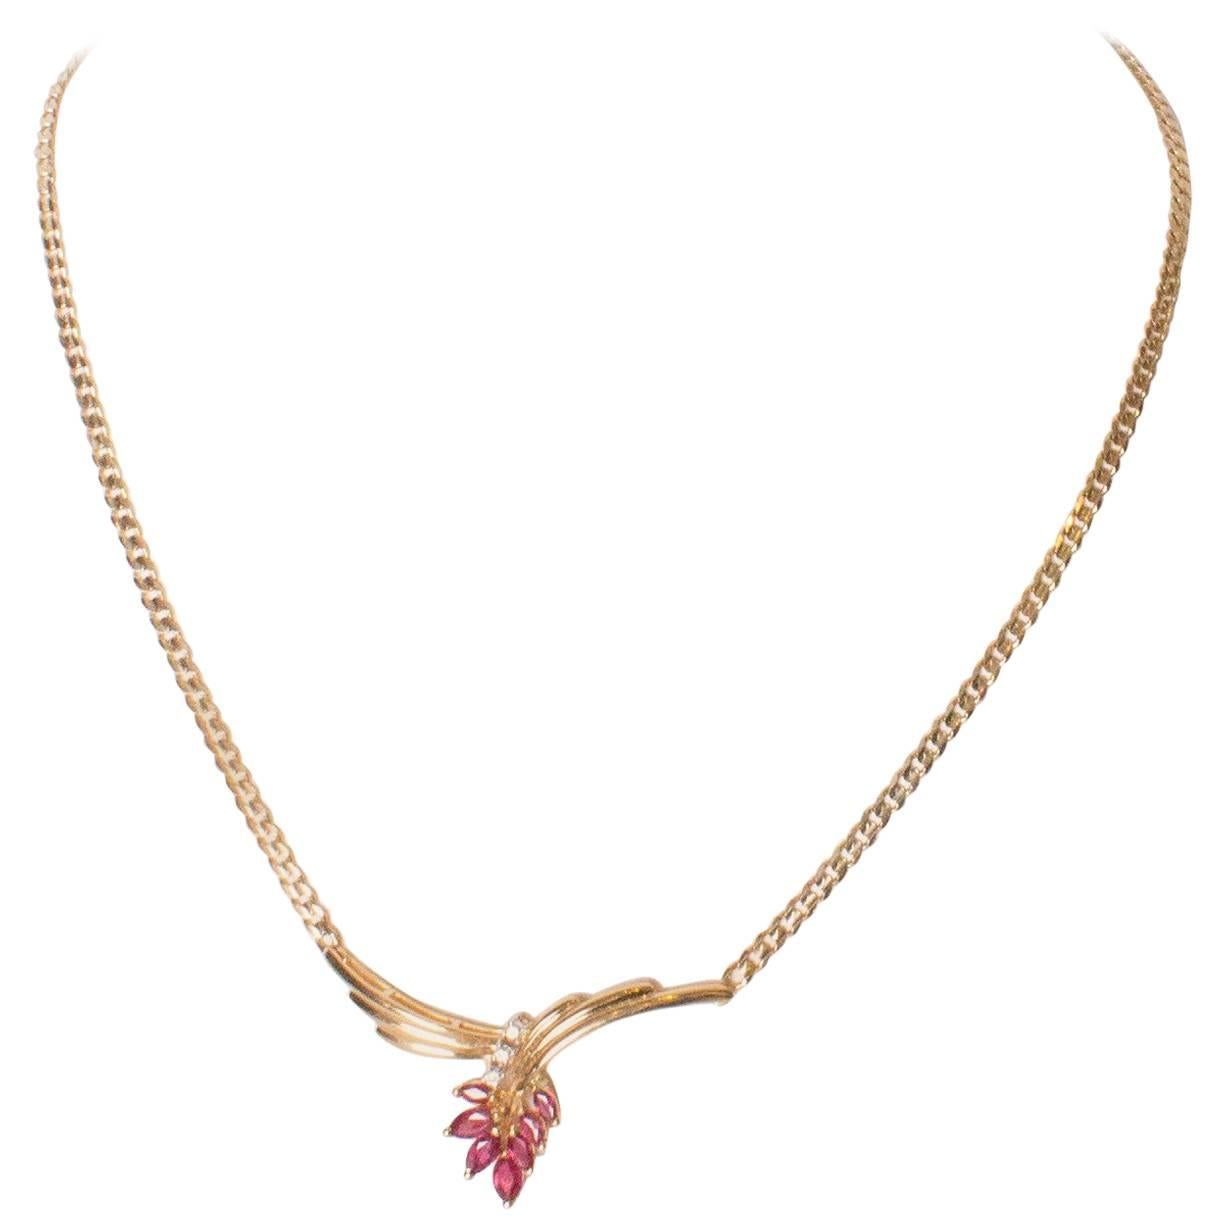 A Vintage Ruby, Diamond and Gold Pendant Necklace.